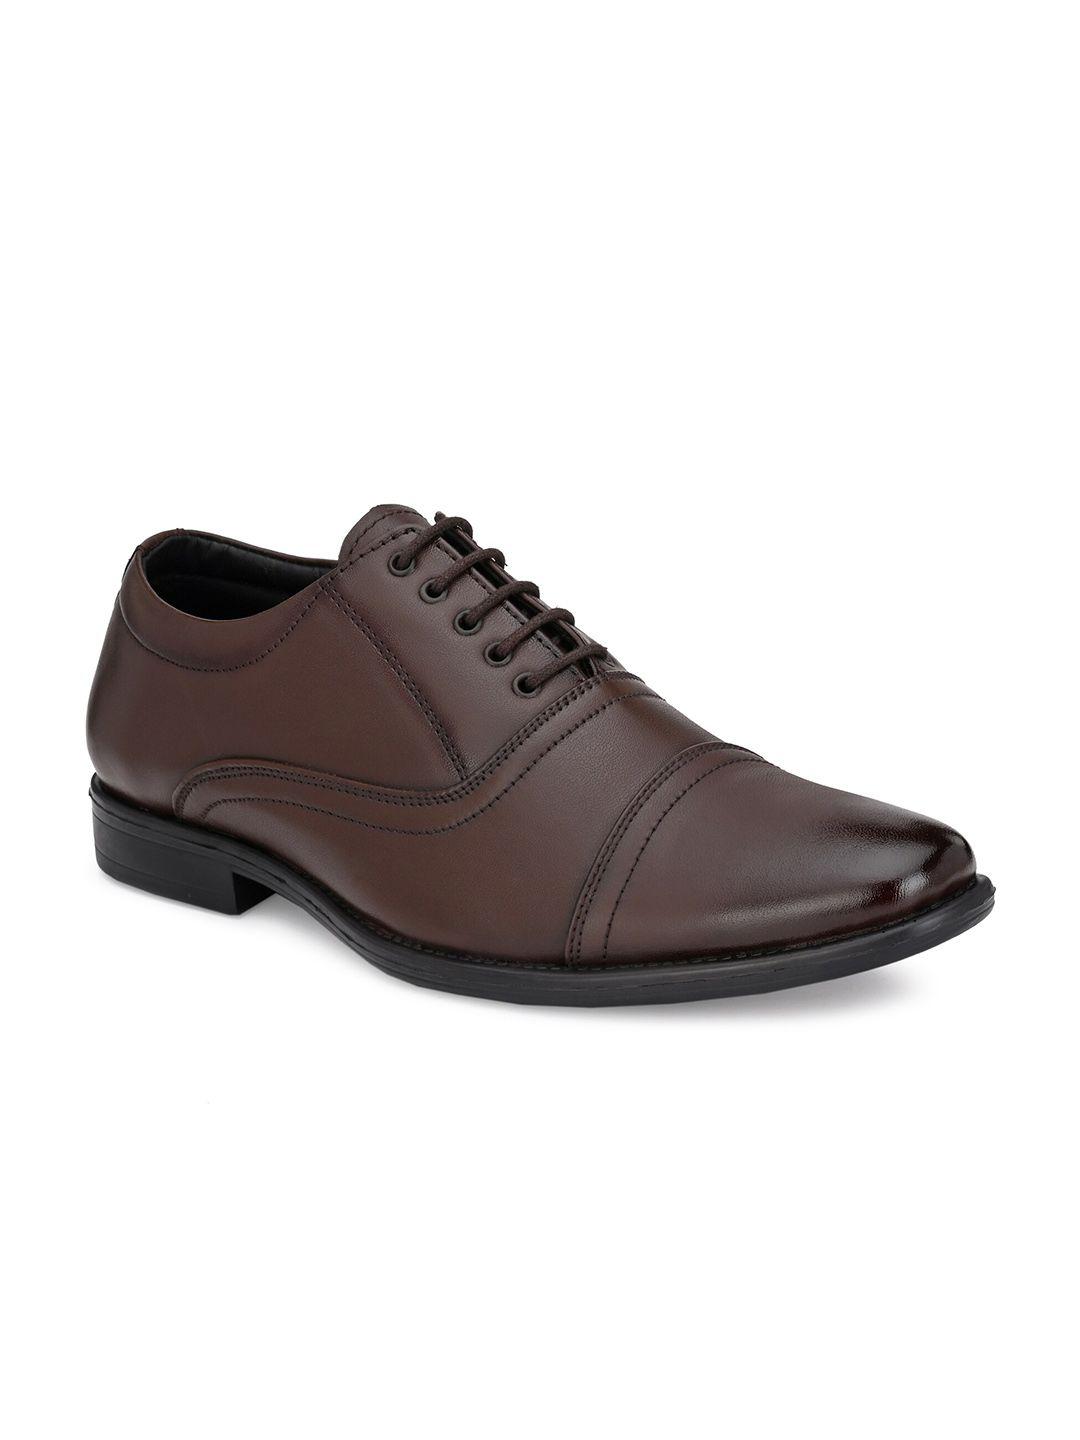 eego italy men brown solid leather formal brogues